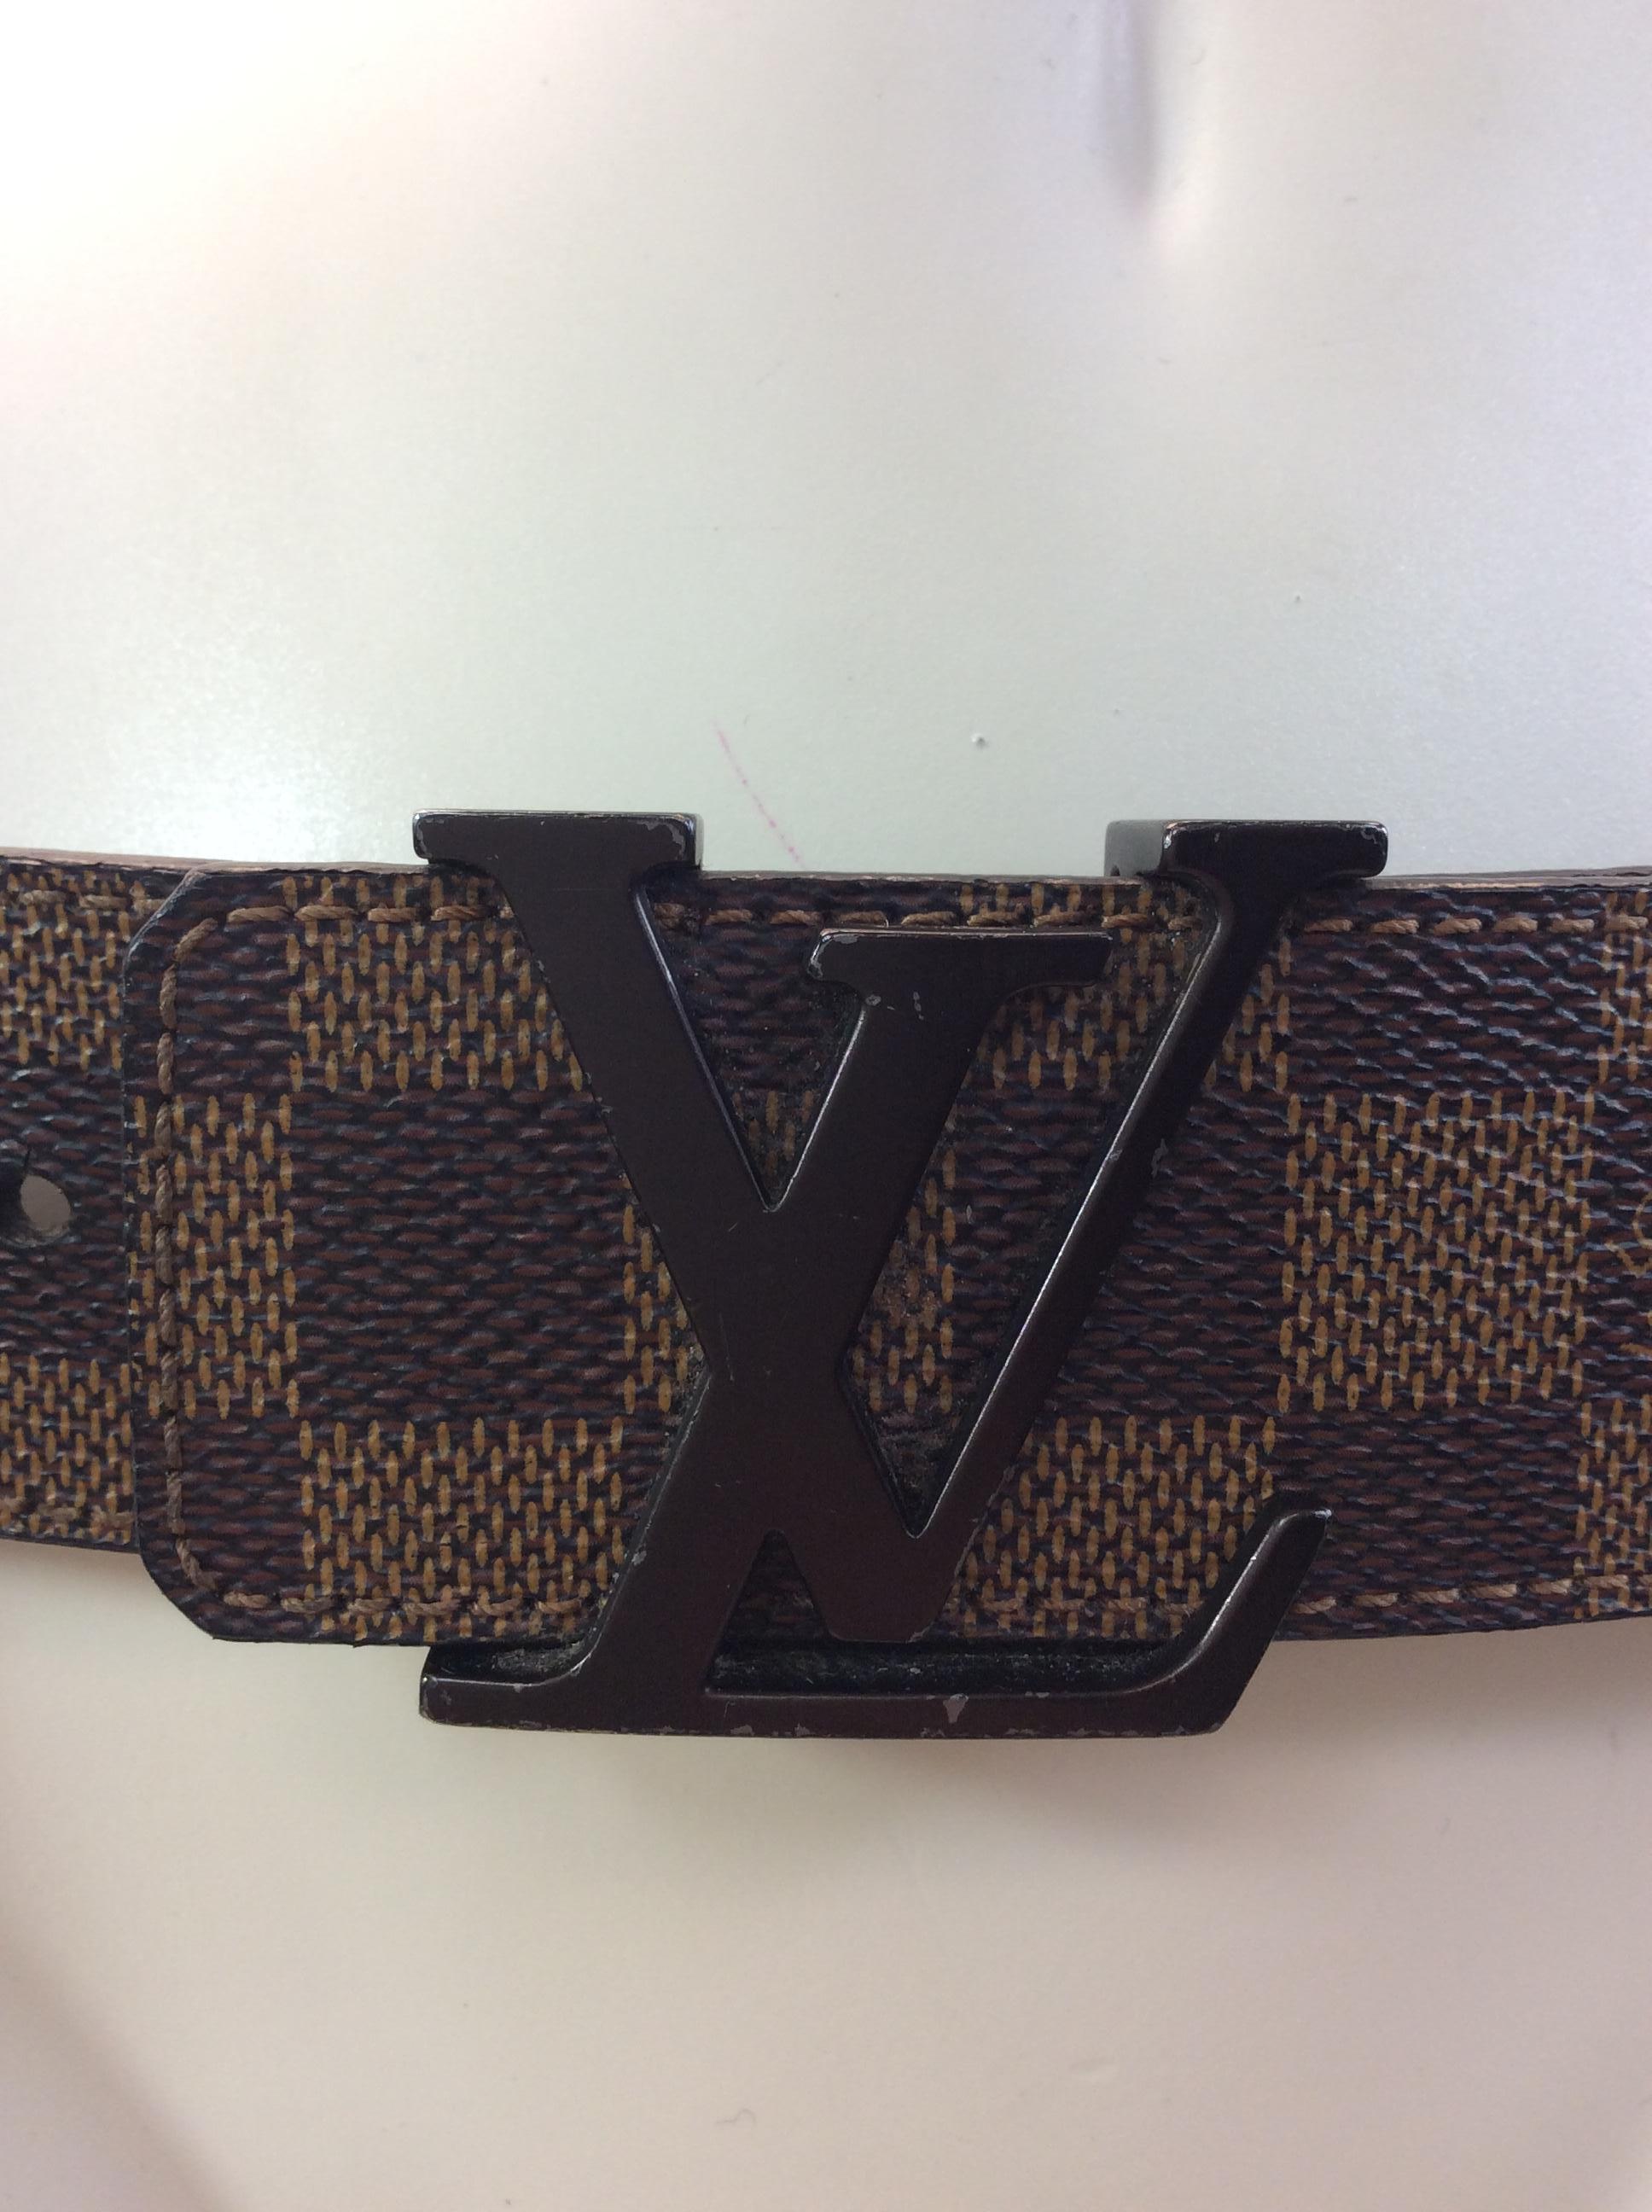 Louis Vuitton Ebene Initiales Belt
$299
Made in France
Leather
Size 85/34
31